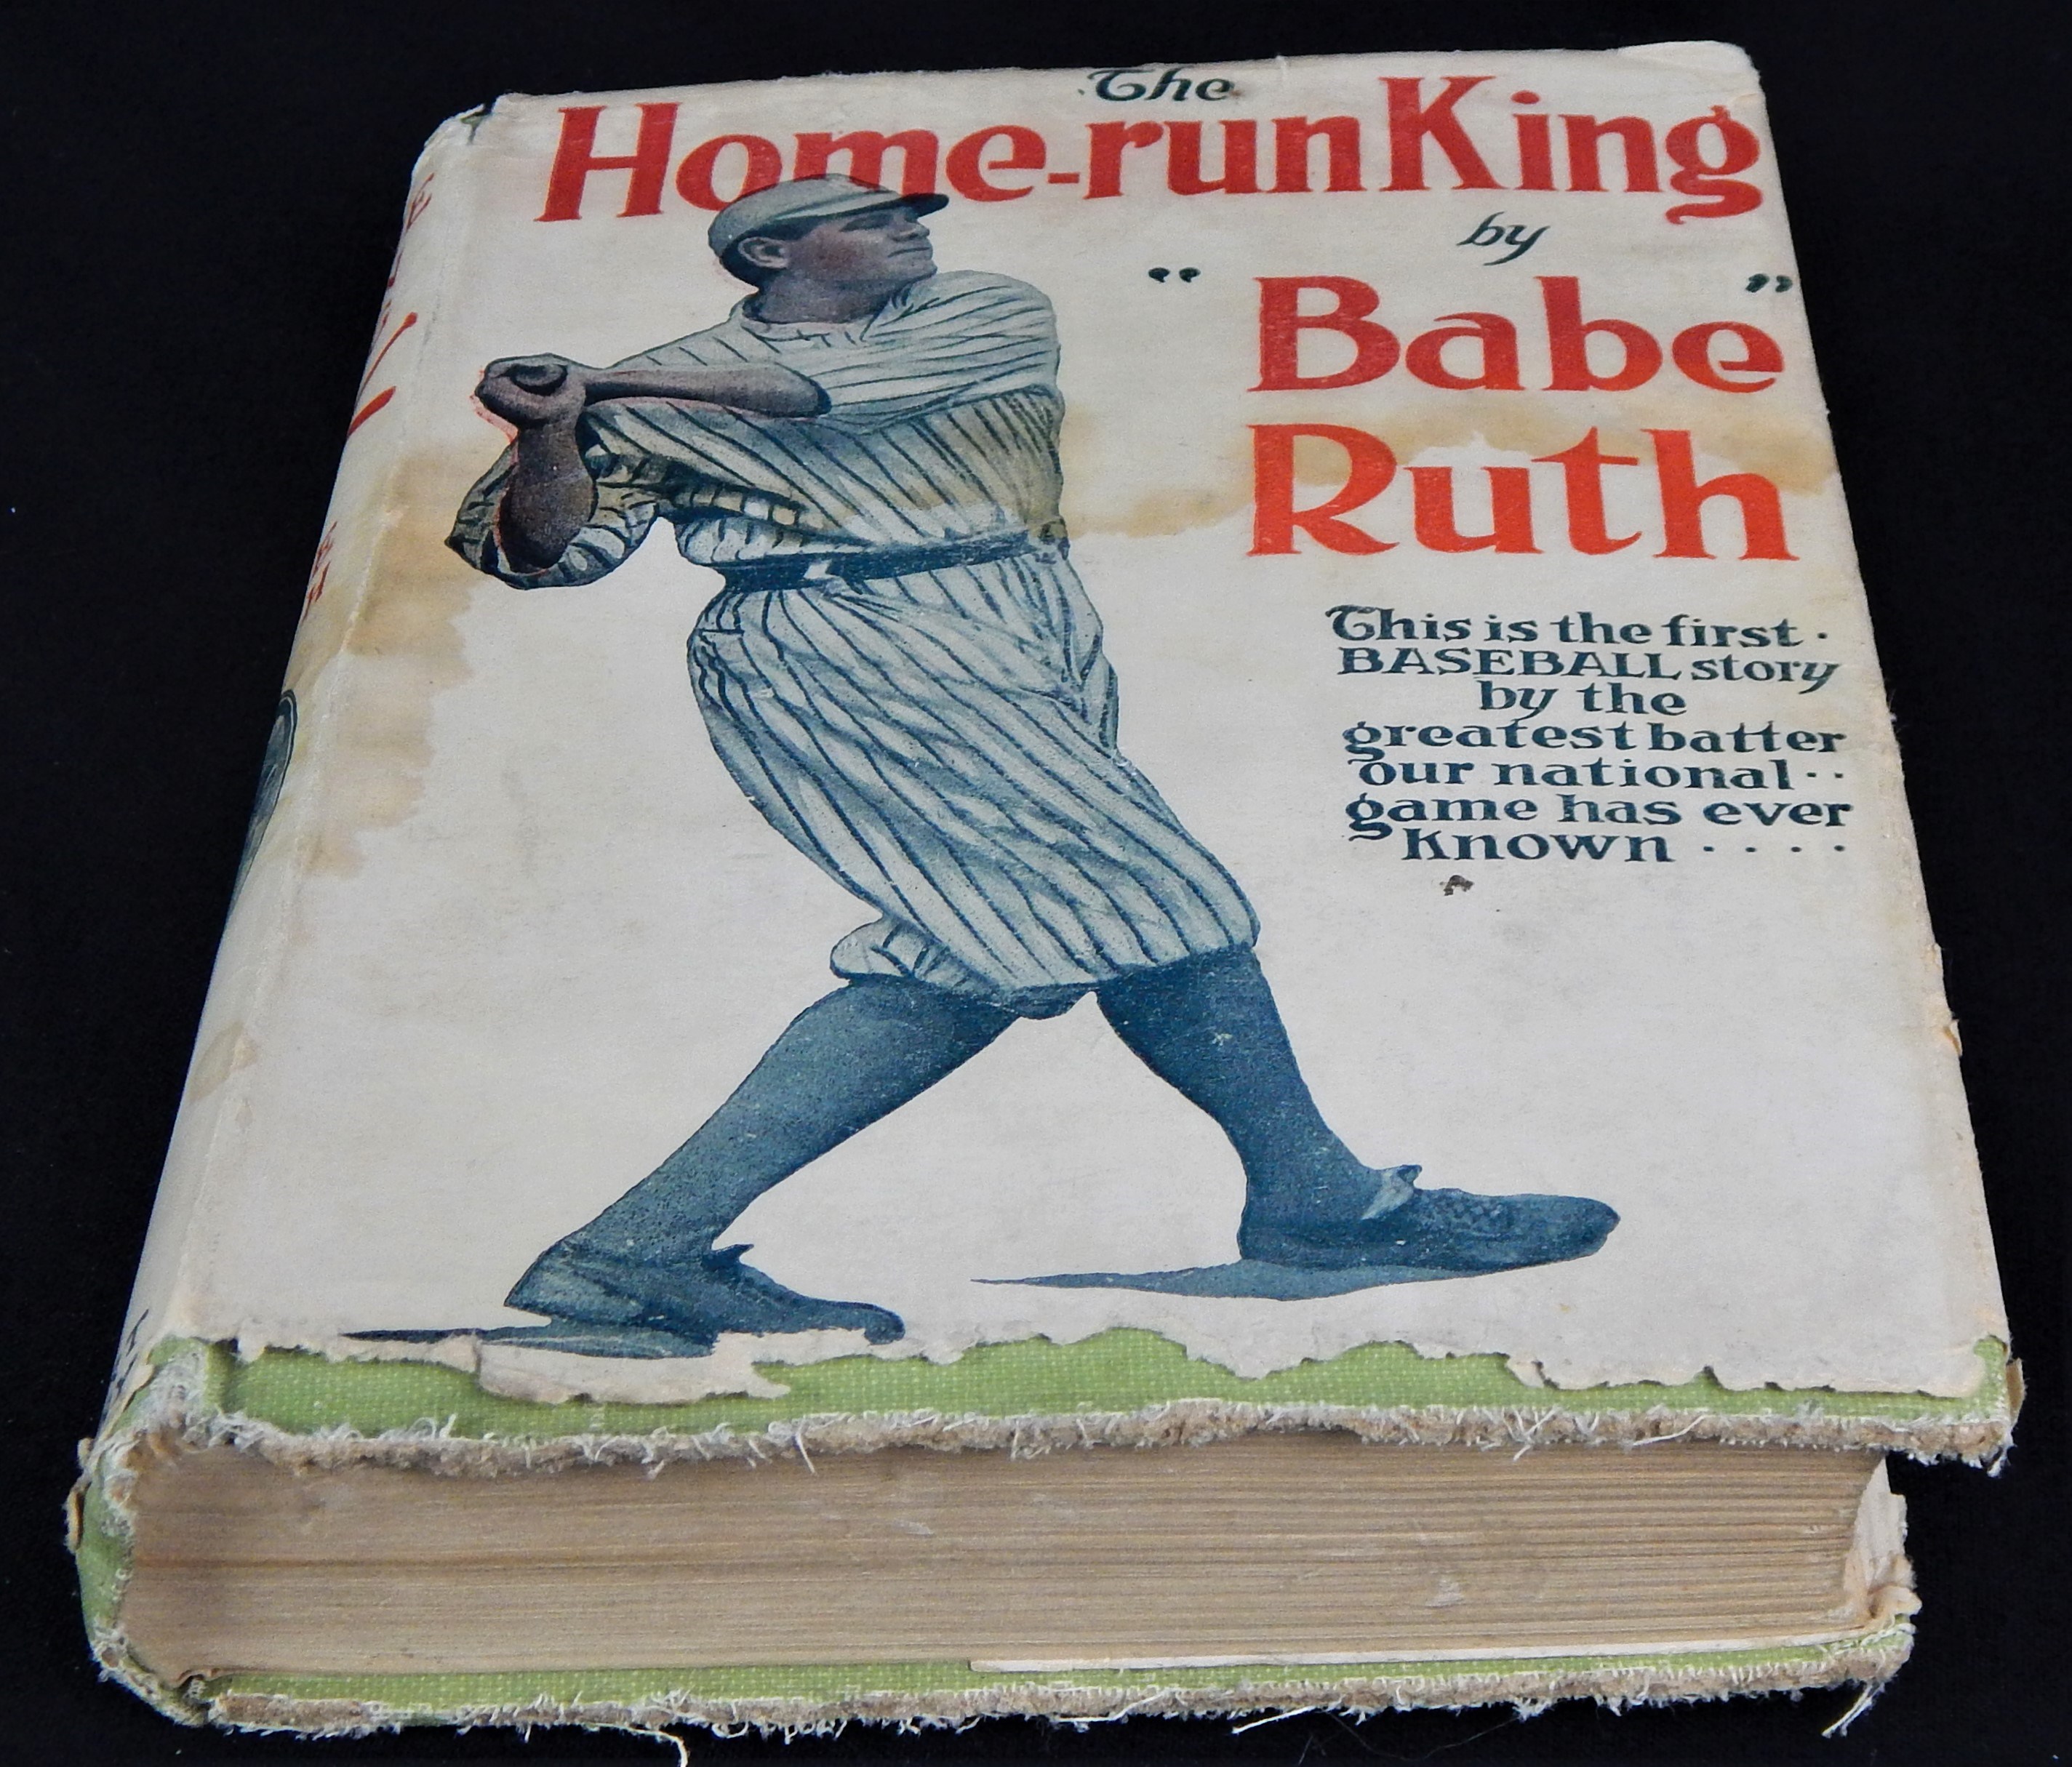 Ruth and Gehrig - 1920 The Home Run King by Babe Ruth with Original Dust Jacket